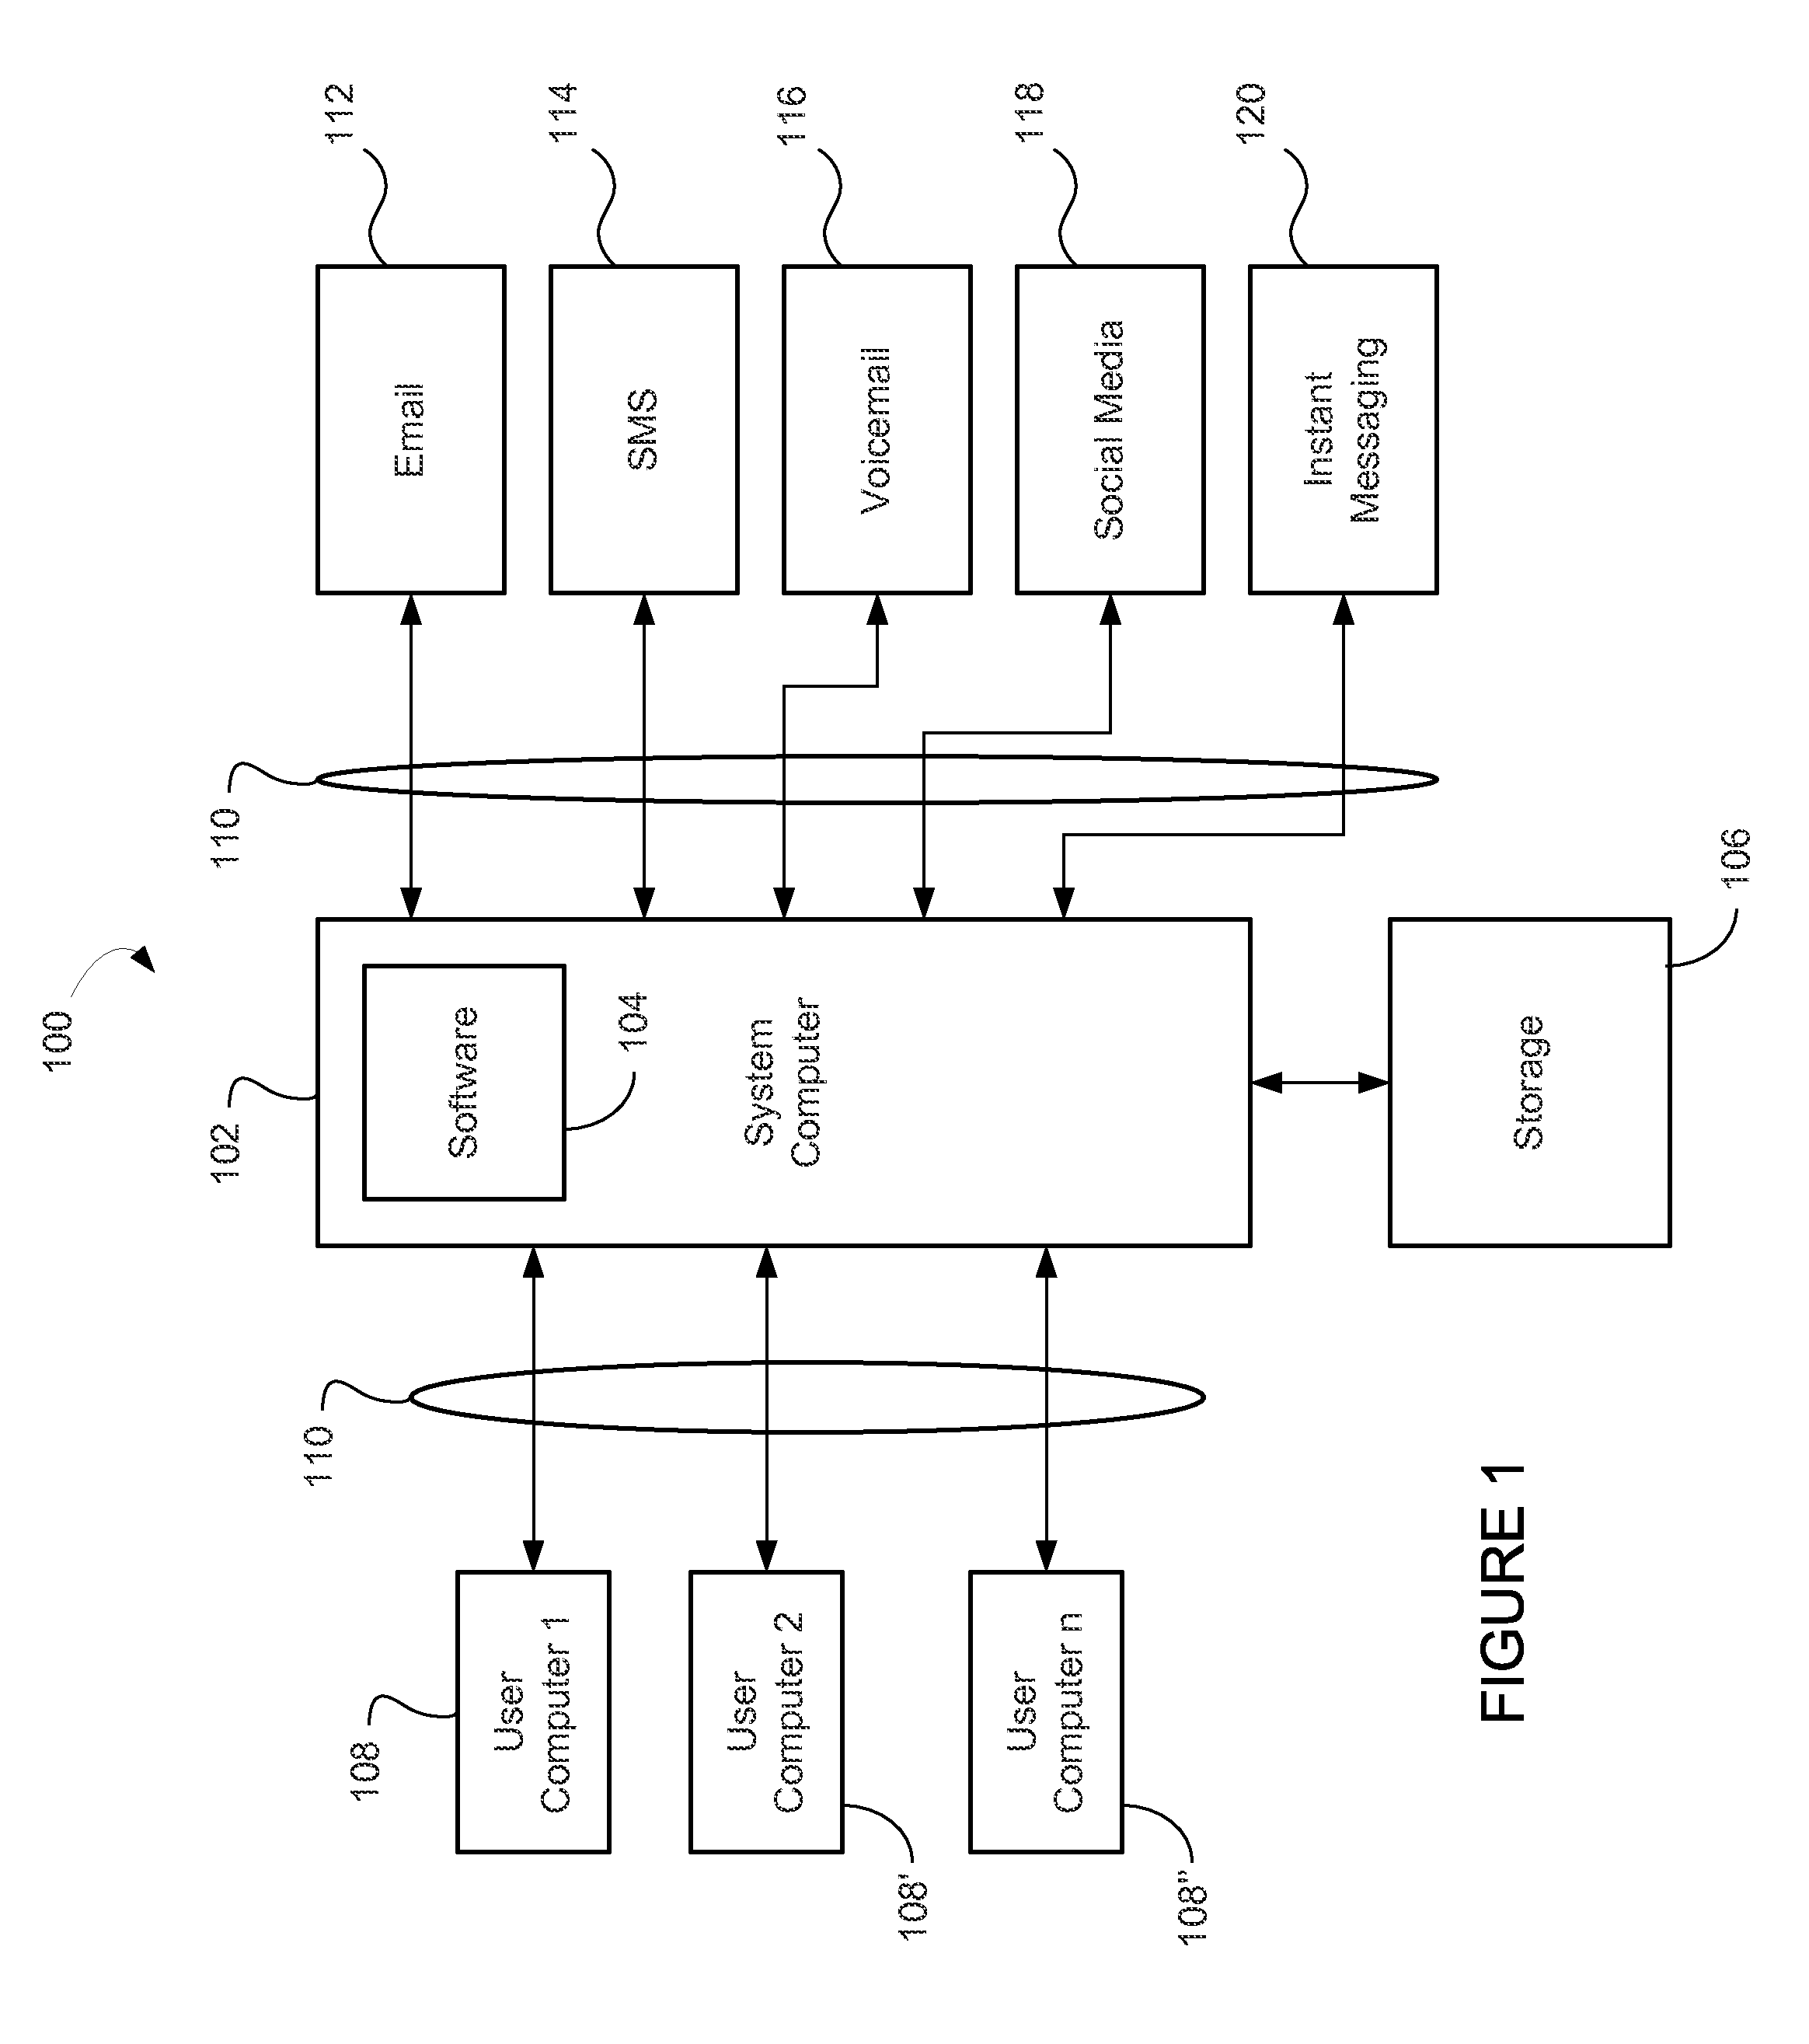 System and method for measuring, comparing and improving work force communication response times, performance, efficiency and effectiveness